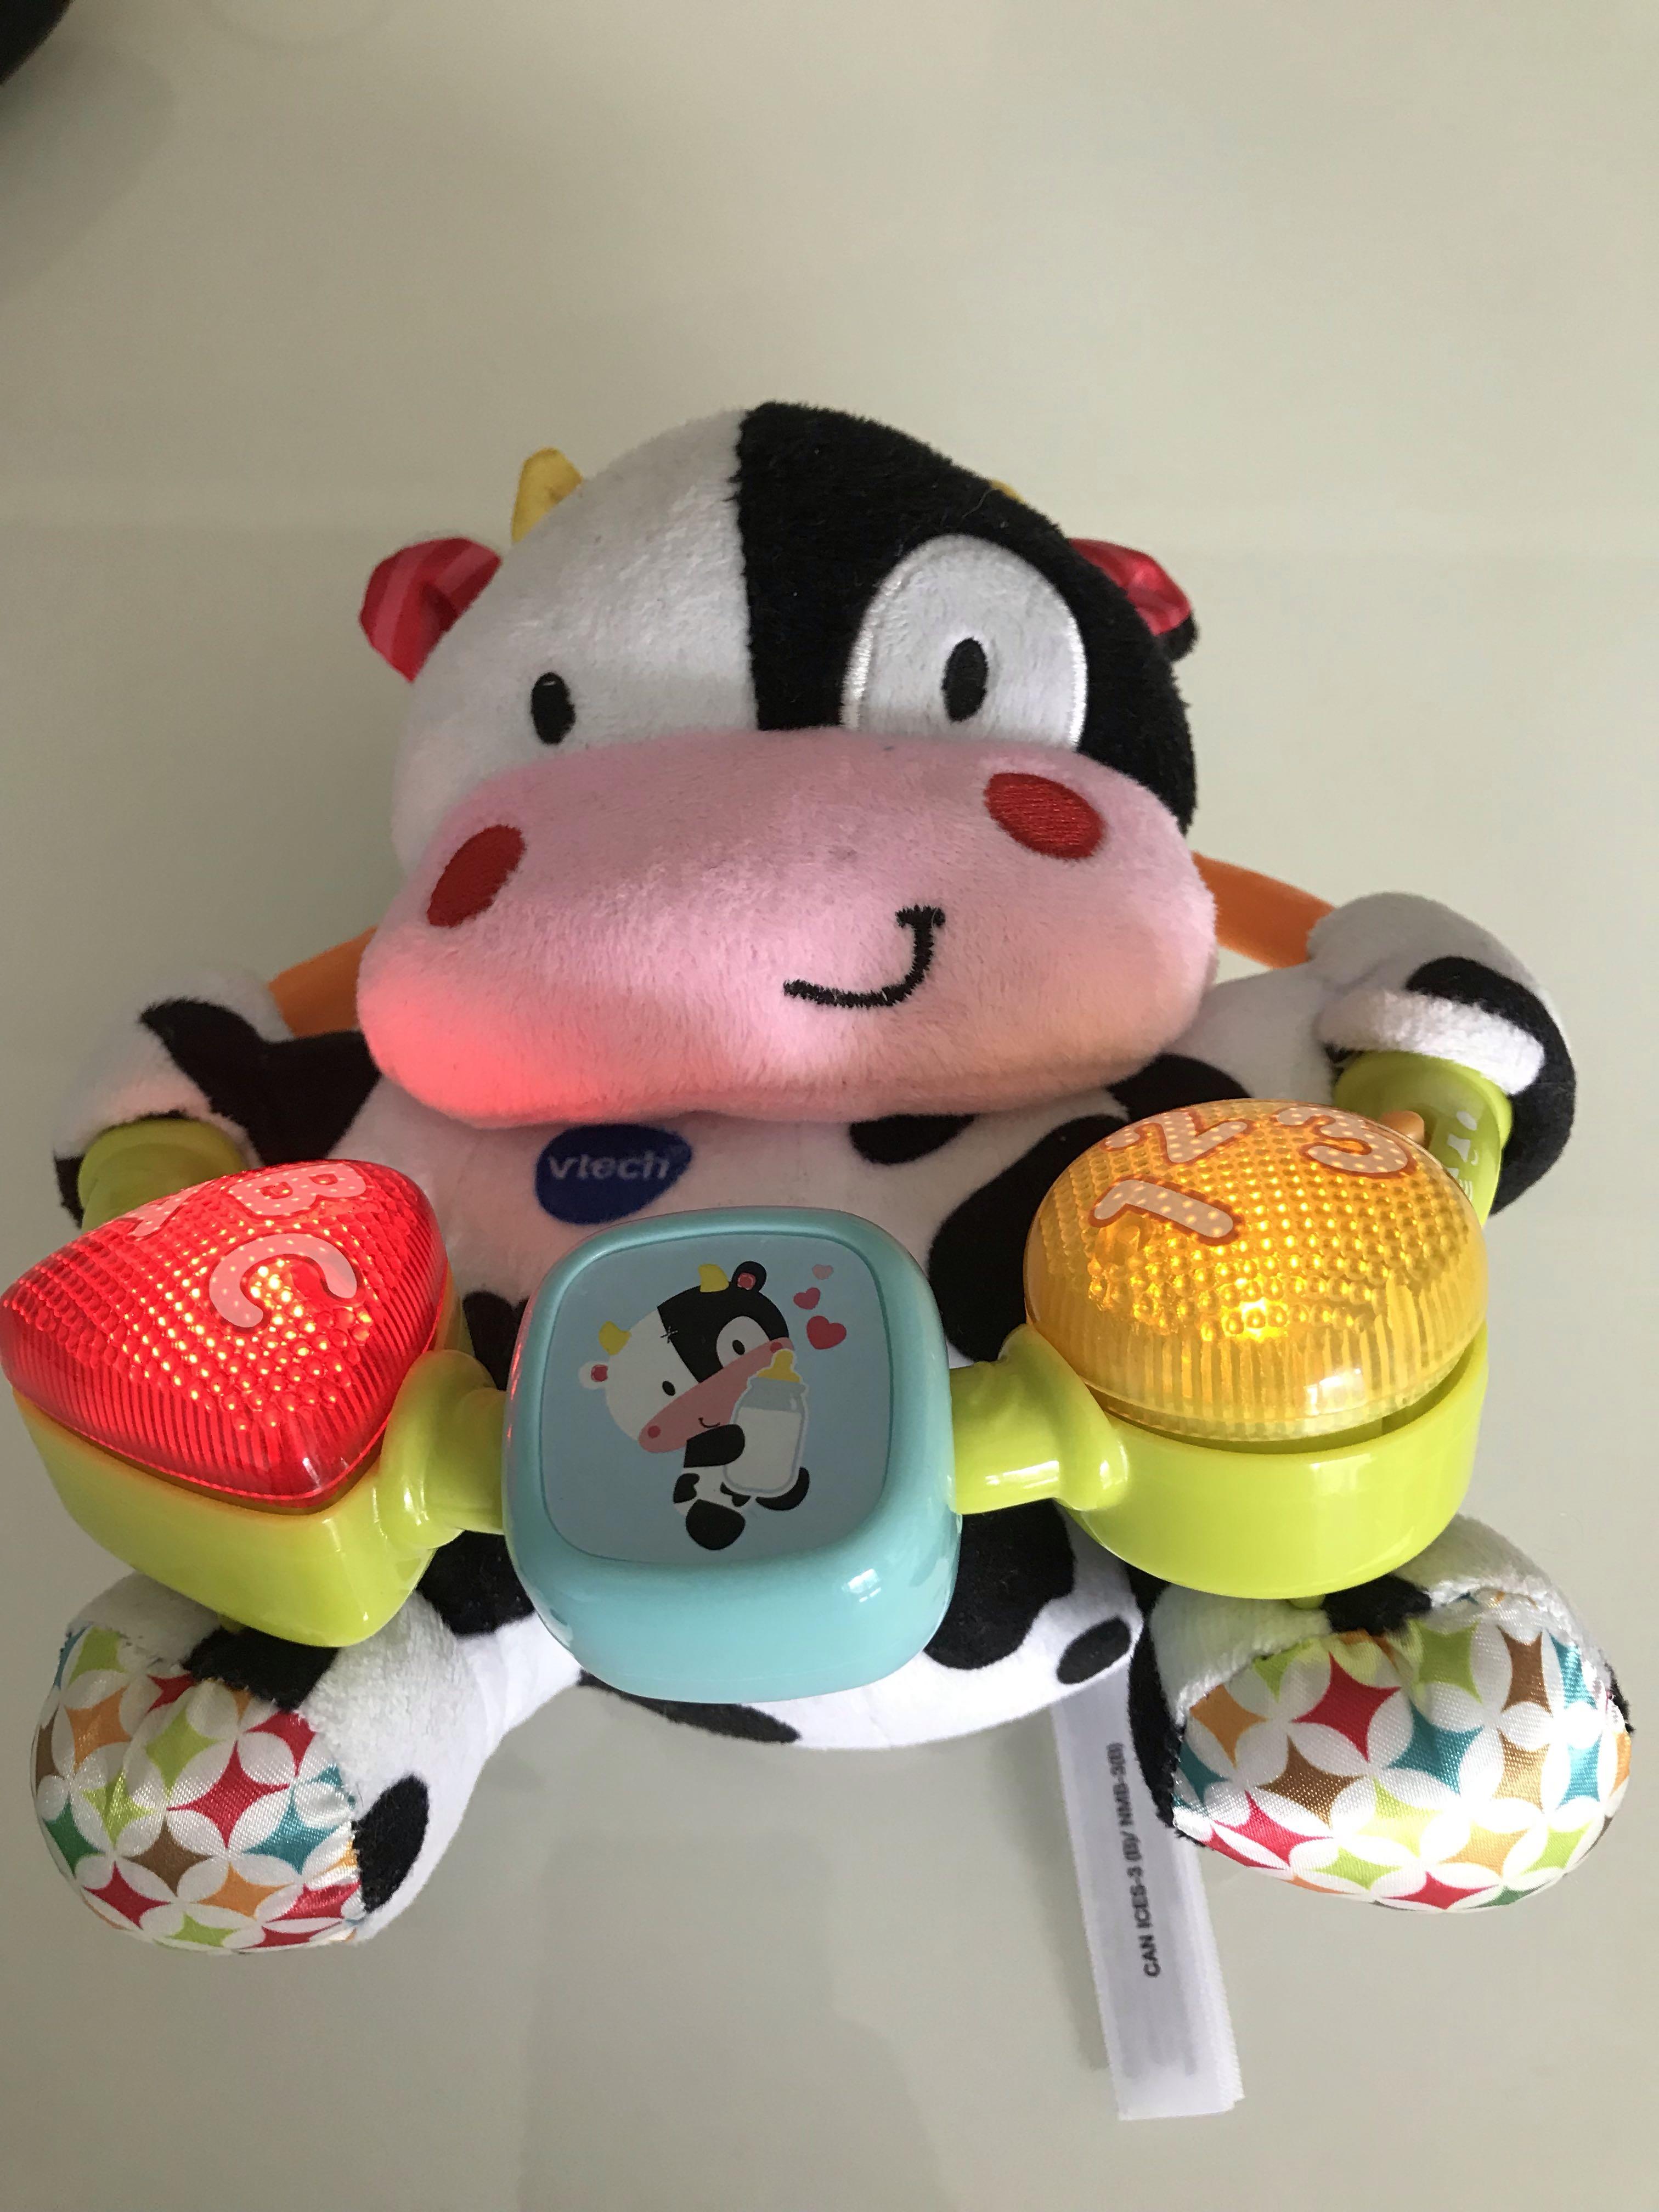 lil critters moosical beads toy